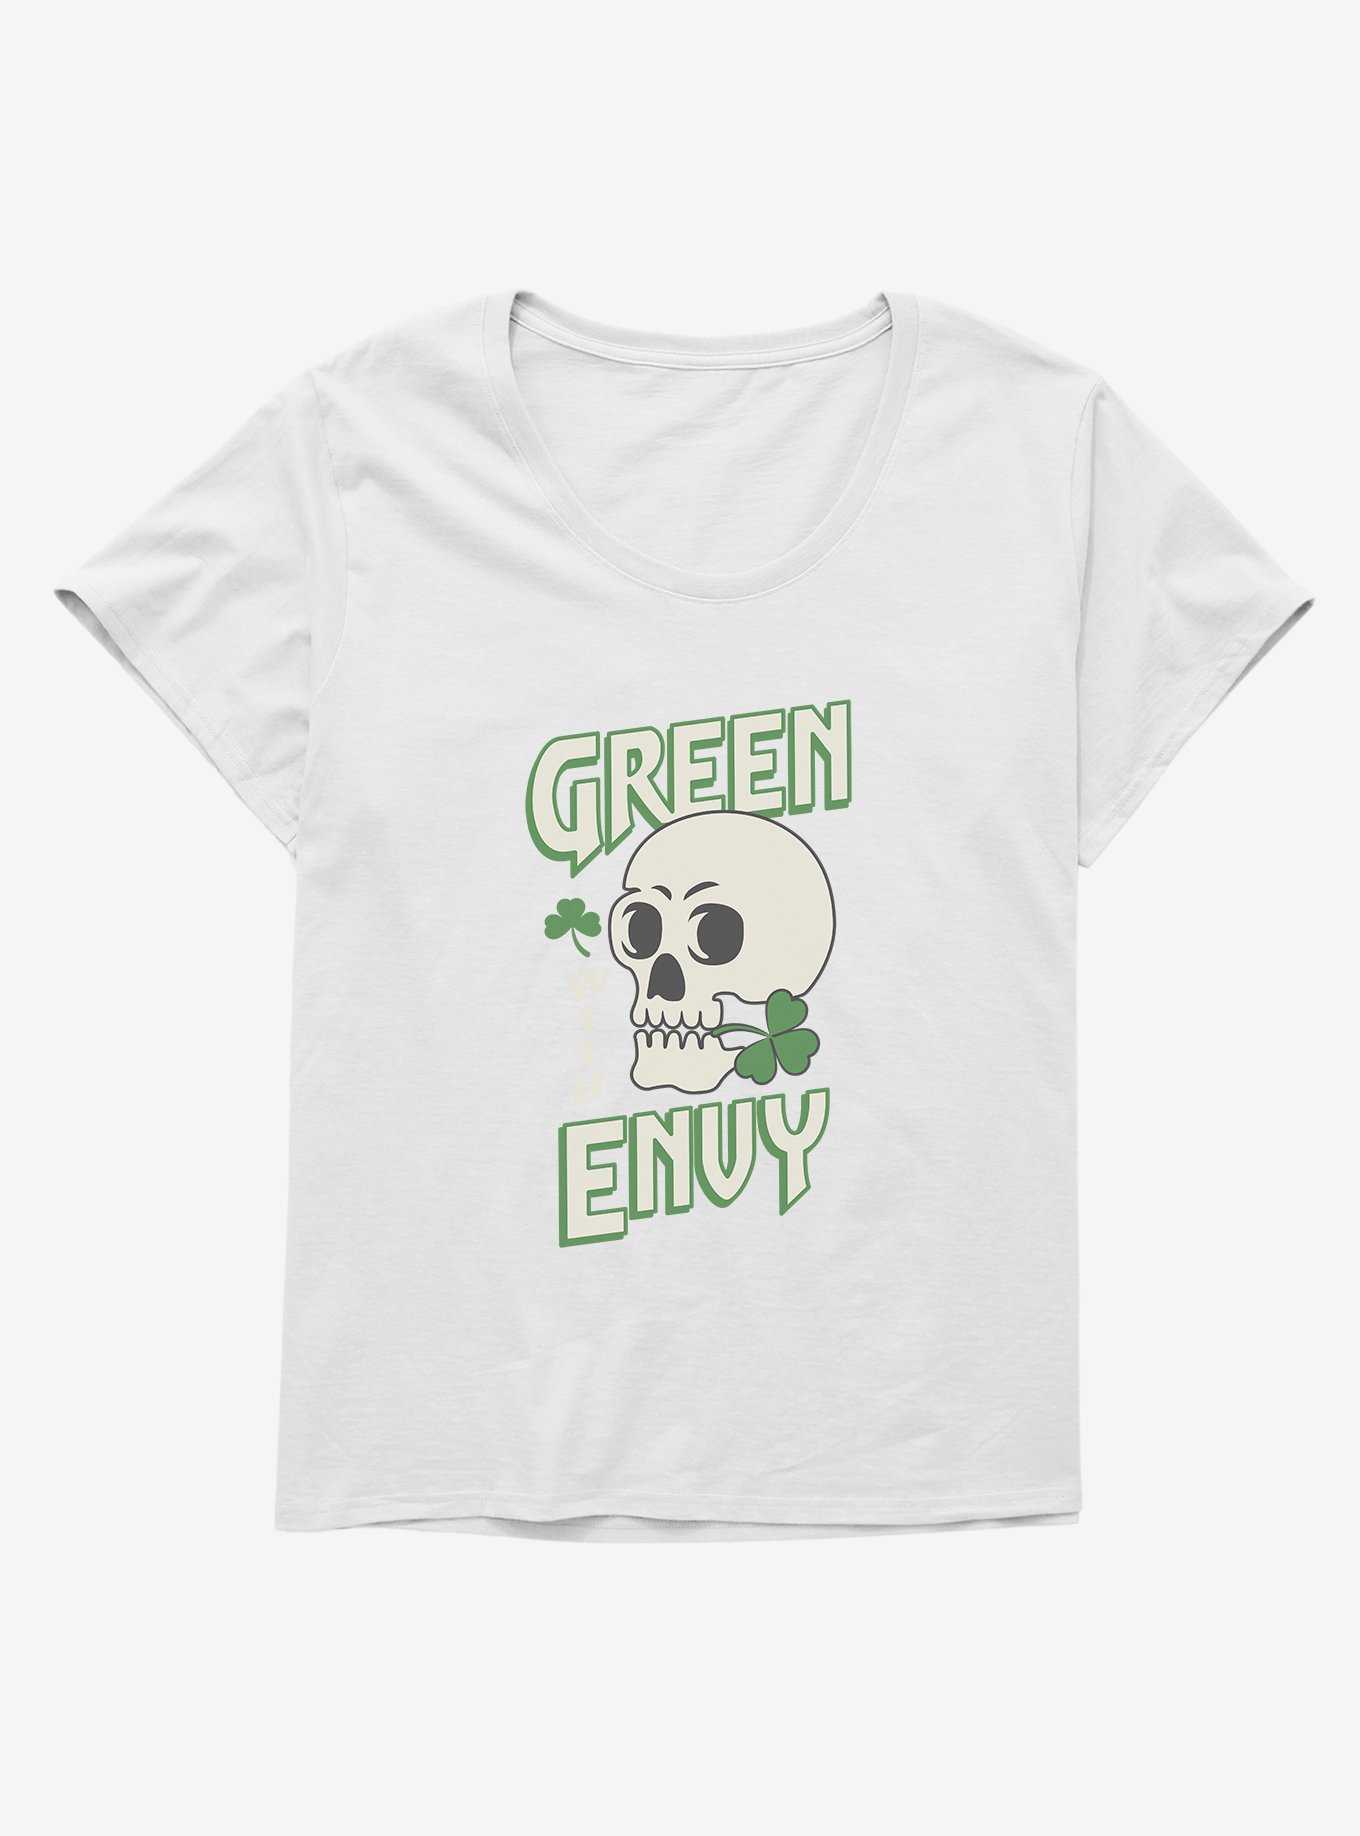 St. Patty's Green With Envy Girls T-Shirt Plus Size, , hi-res